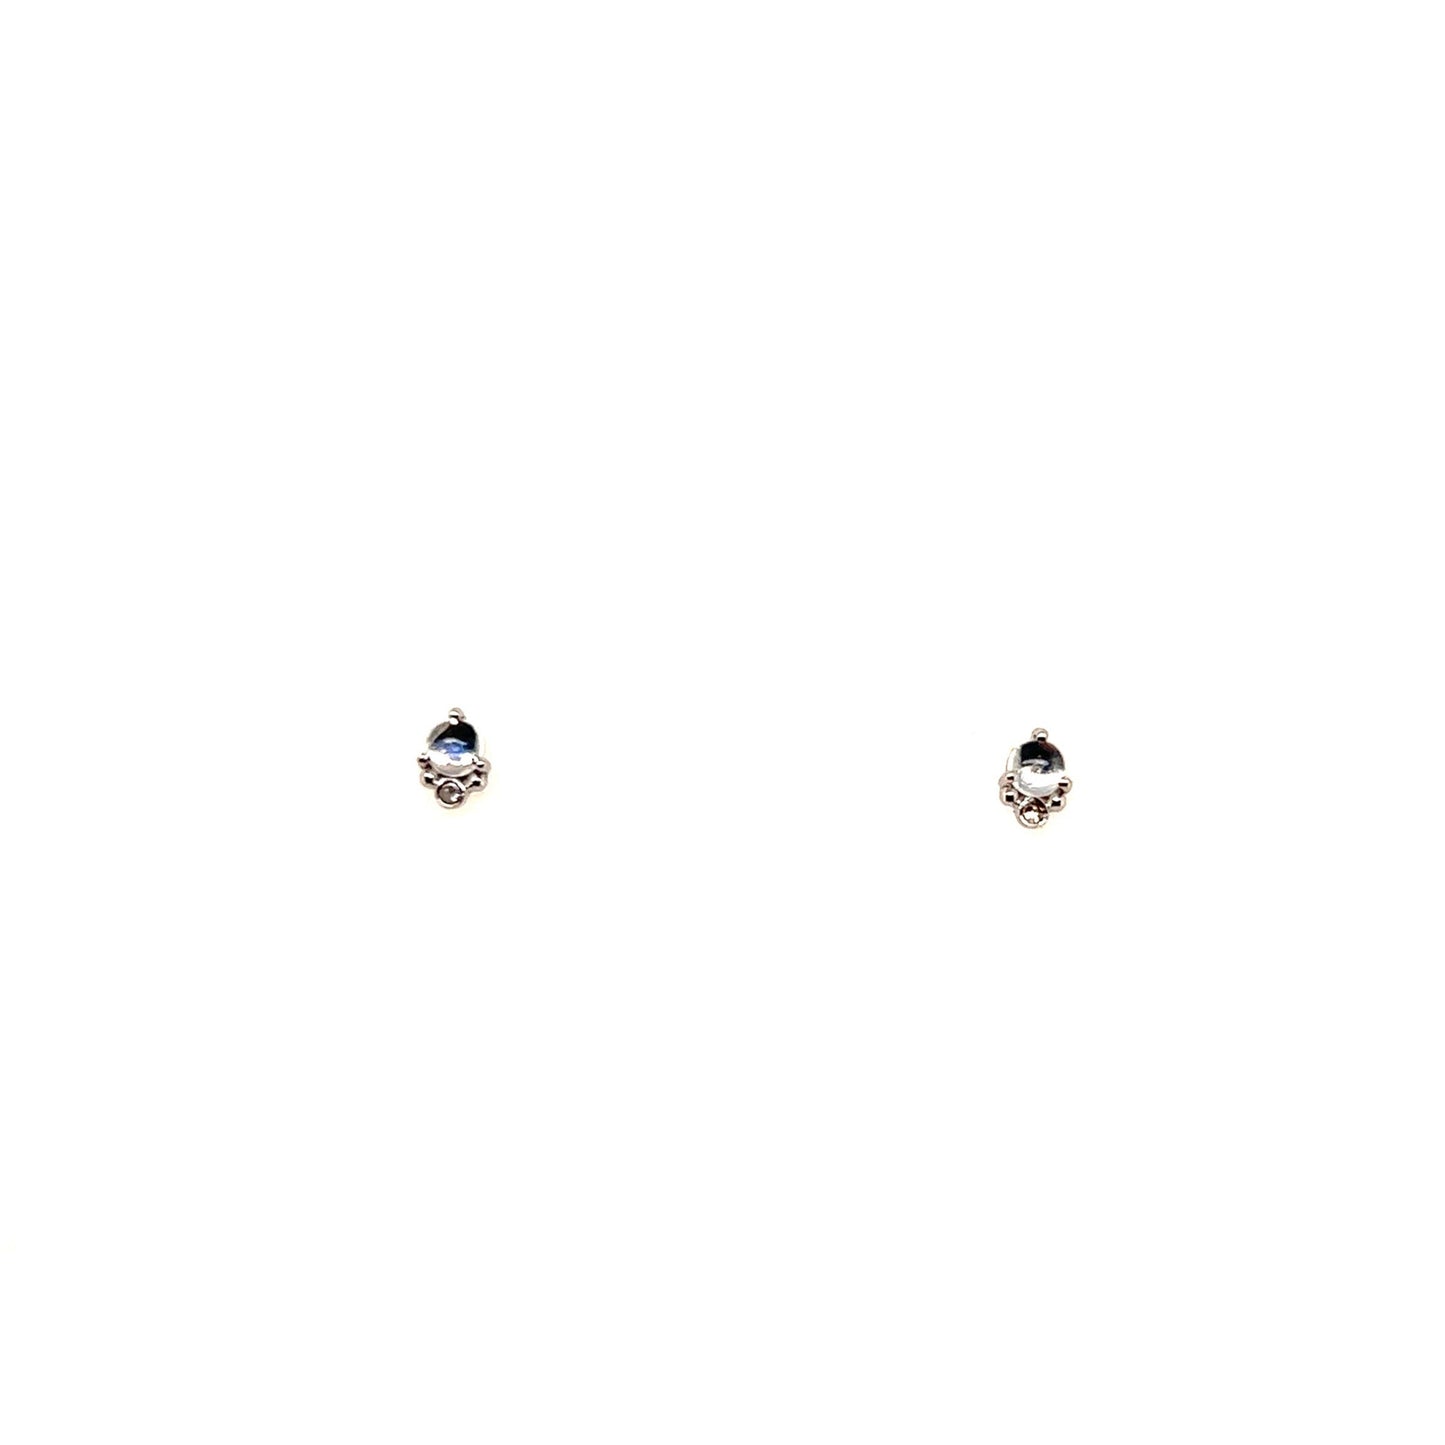 Celine Daoust 14kt White Gold Round Moonstone and Diamond Stud Earrings